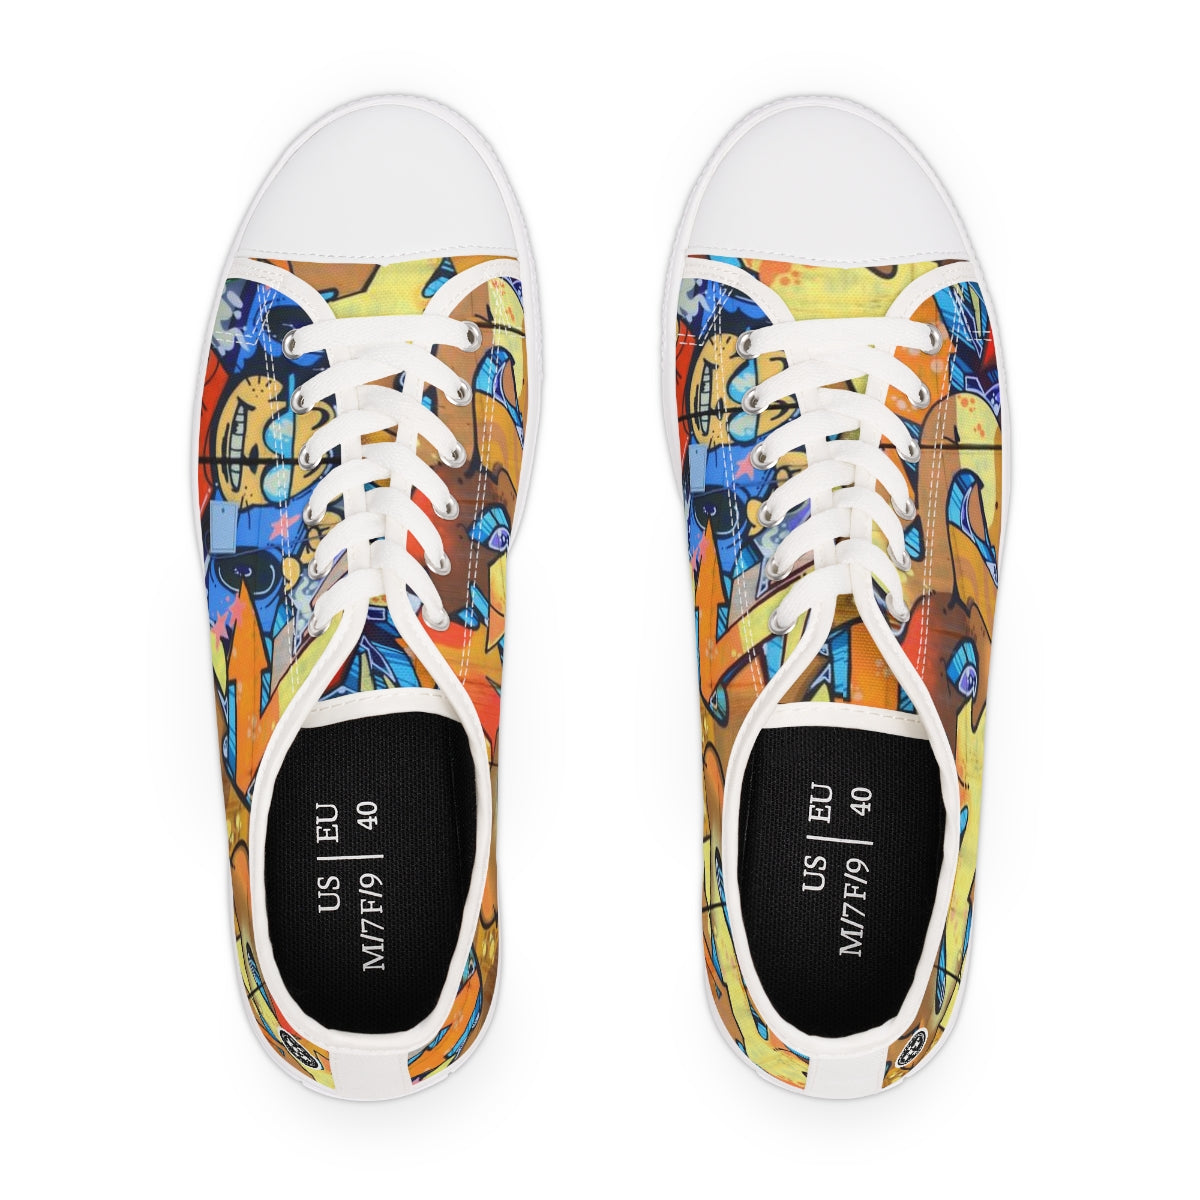 Main and Fifth – Women's Low Top Sneakers